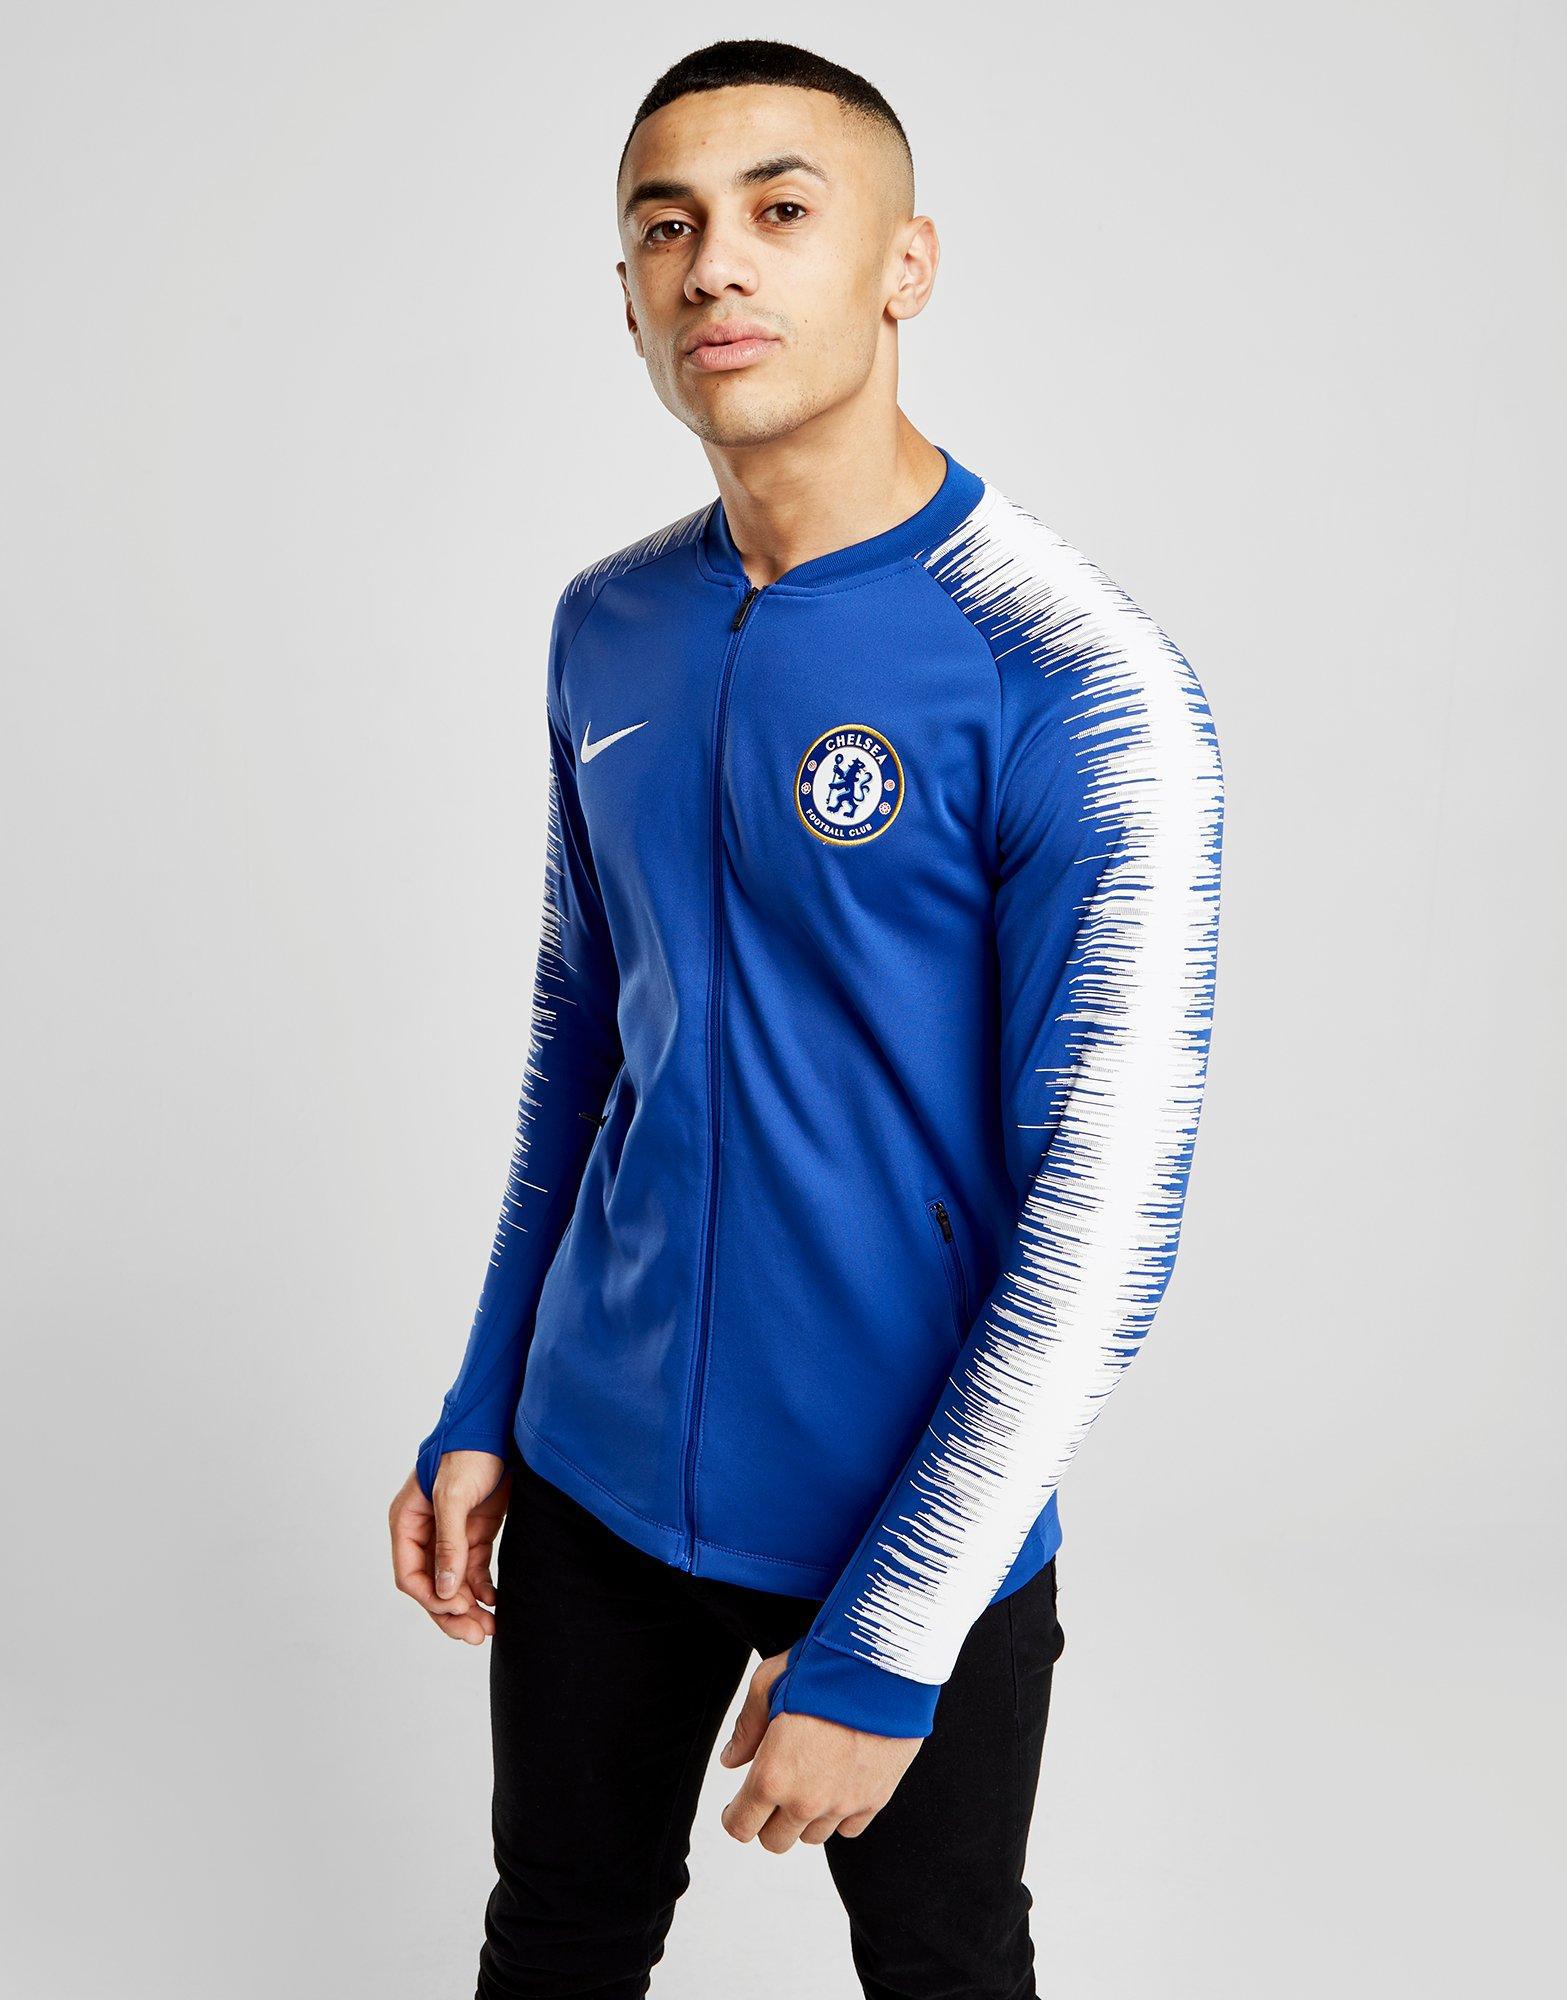 Nike Synthetic Chelsea Fc 2018/19 Anthem Jacket in Blue for Men - Lyst